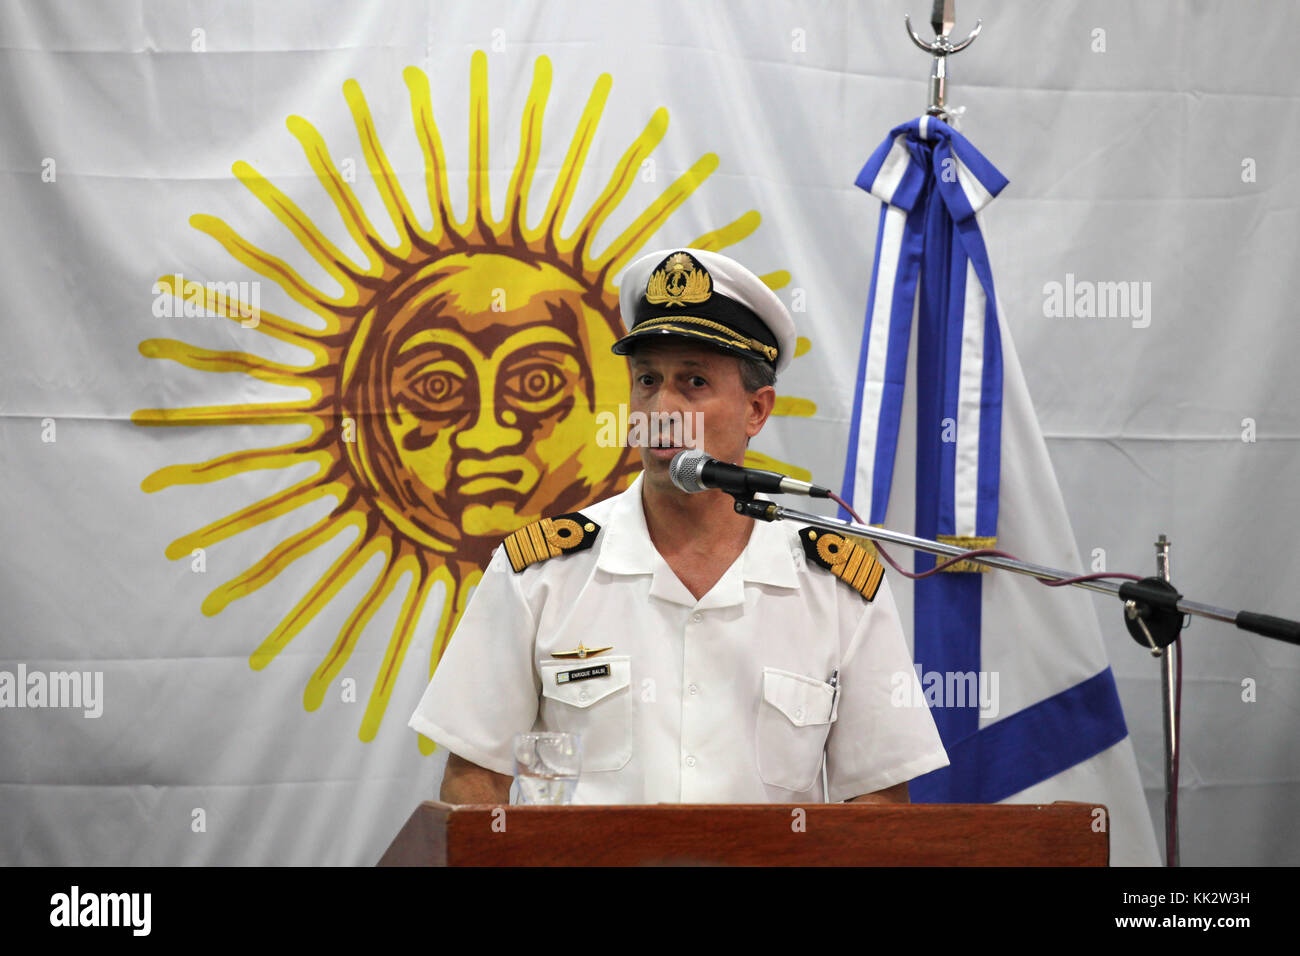 Buenos Aires, Buenos Aires, Argentina. 28th Nov, 2017. Argentina Navy spokesman Enrique Balbi brief the press about the multinational efforts looking for the missing ARA San Juan submarine. Credit: Claudio Santisteban/ZUMA Wire/Alamy Live News Stock Photo